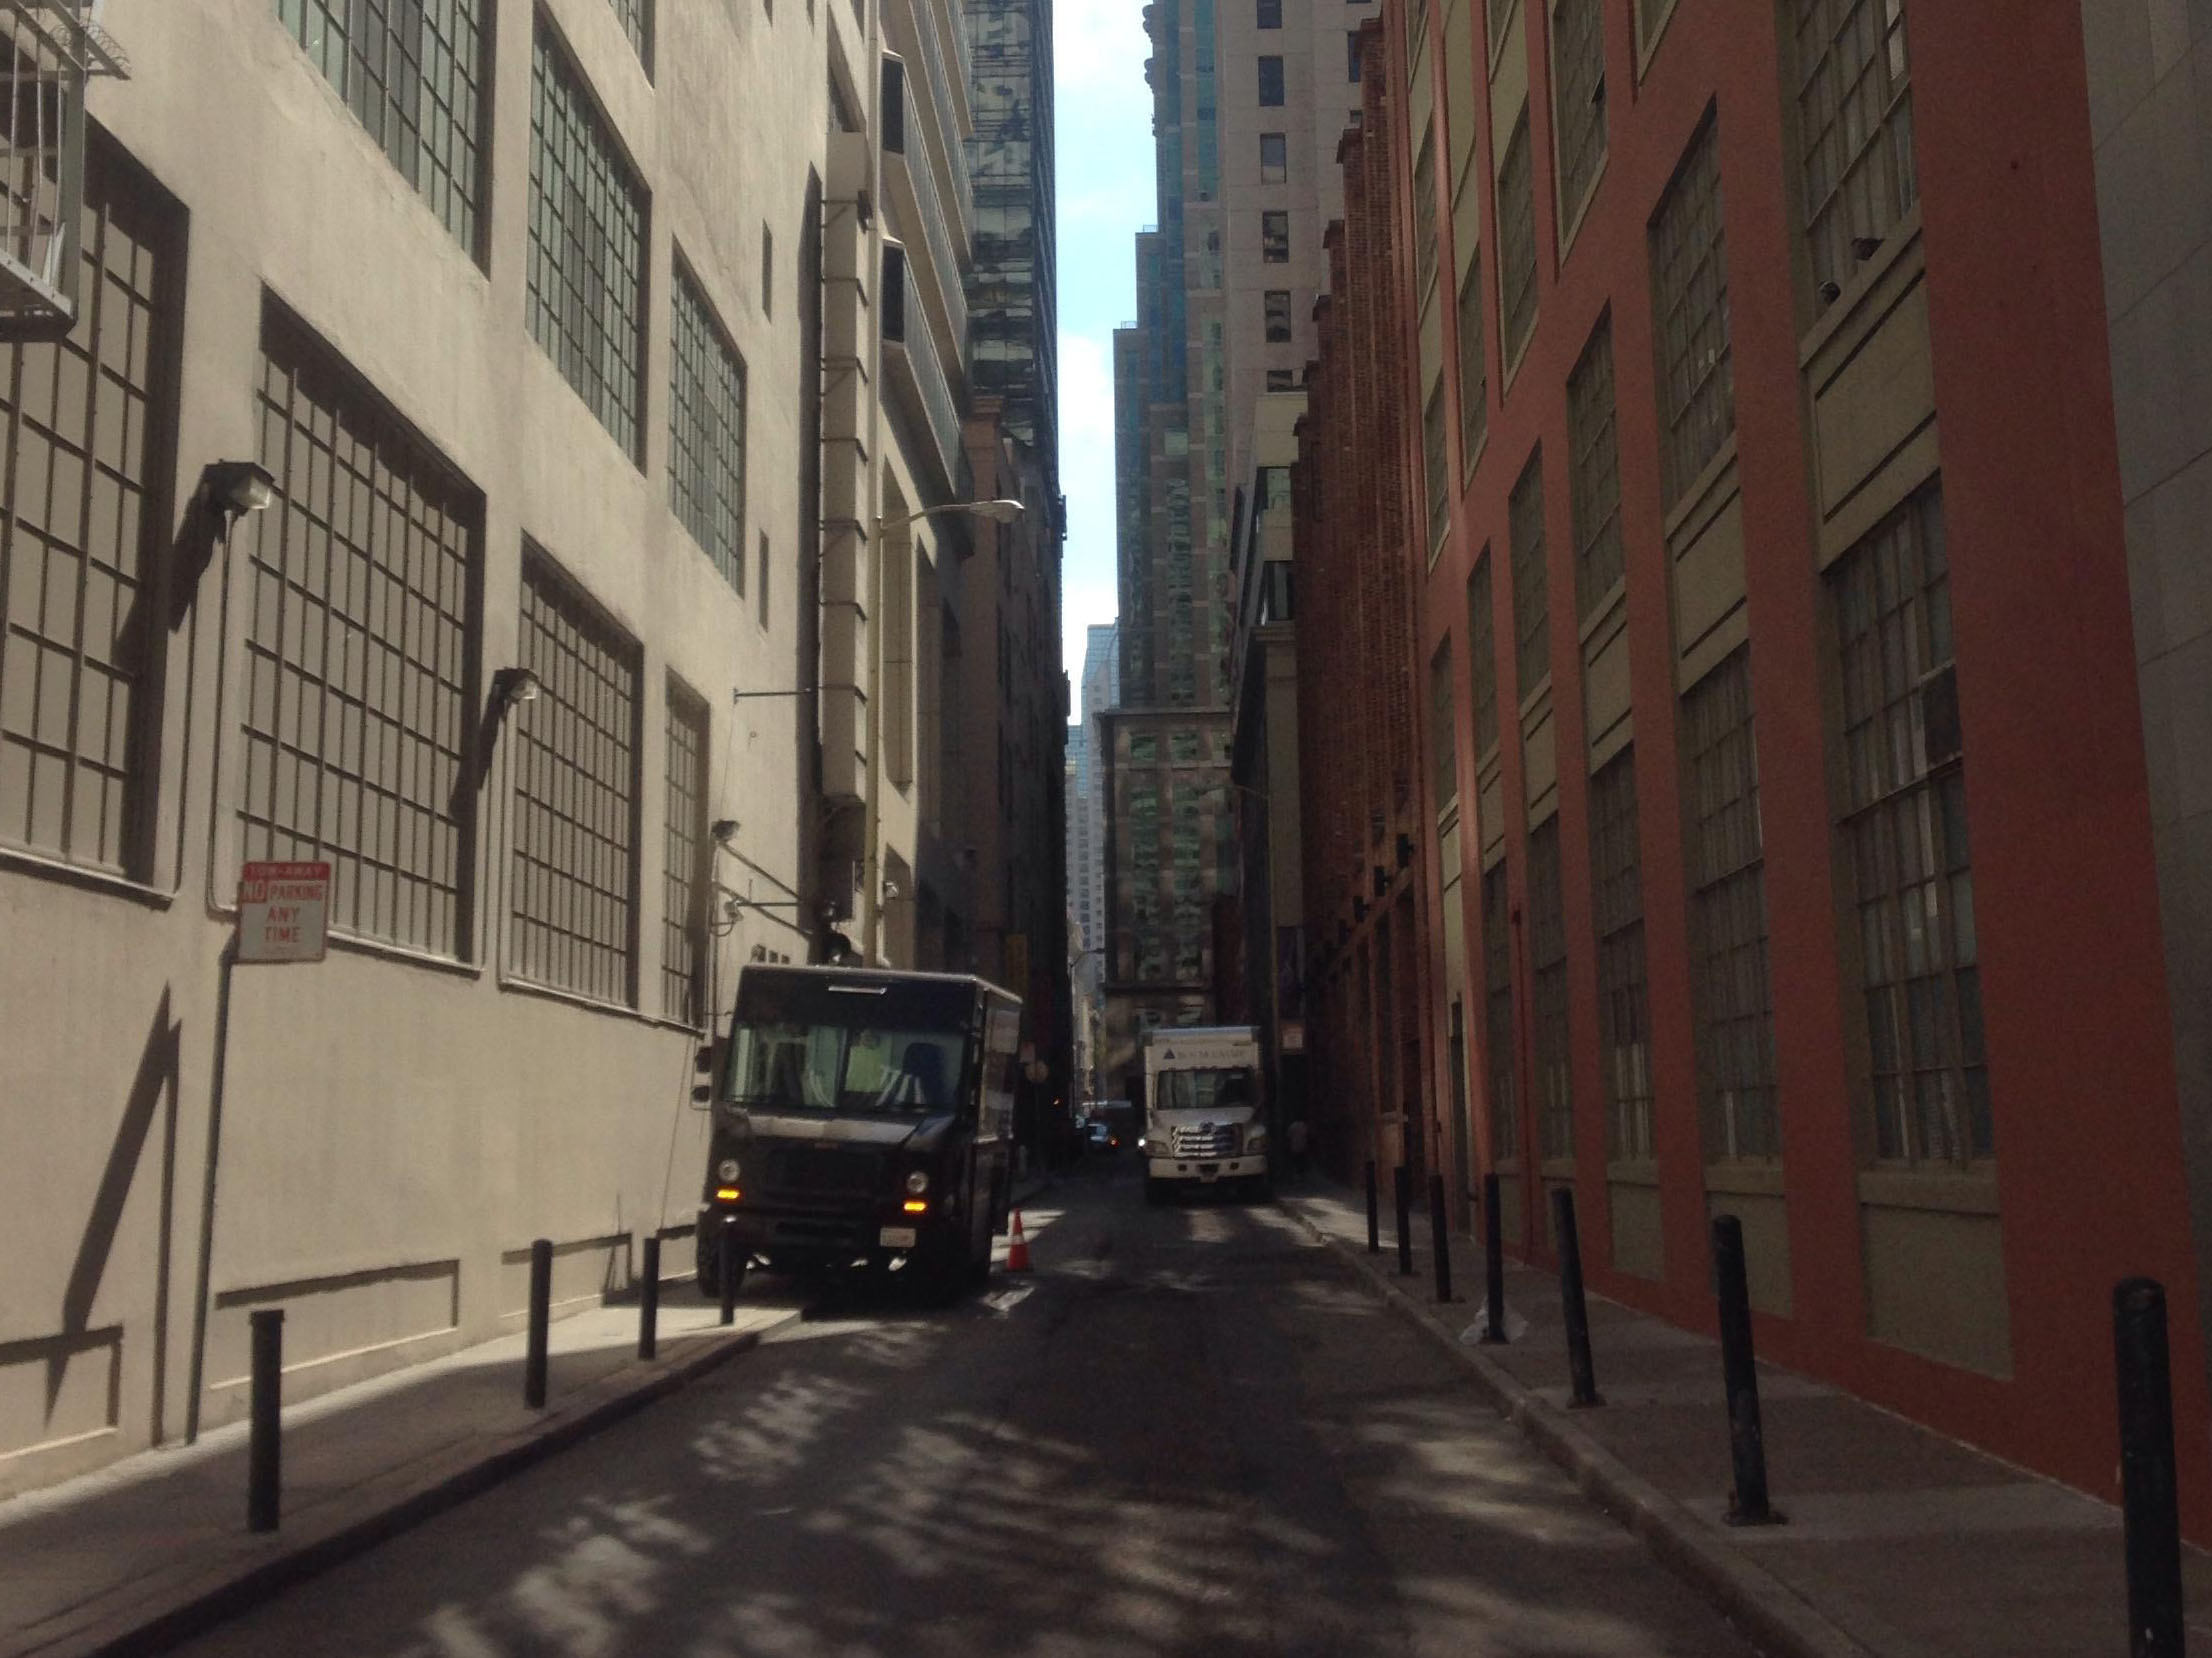 A picture of an alley in a city.